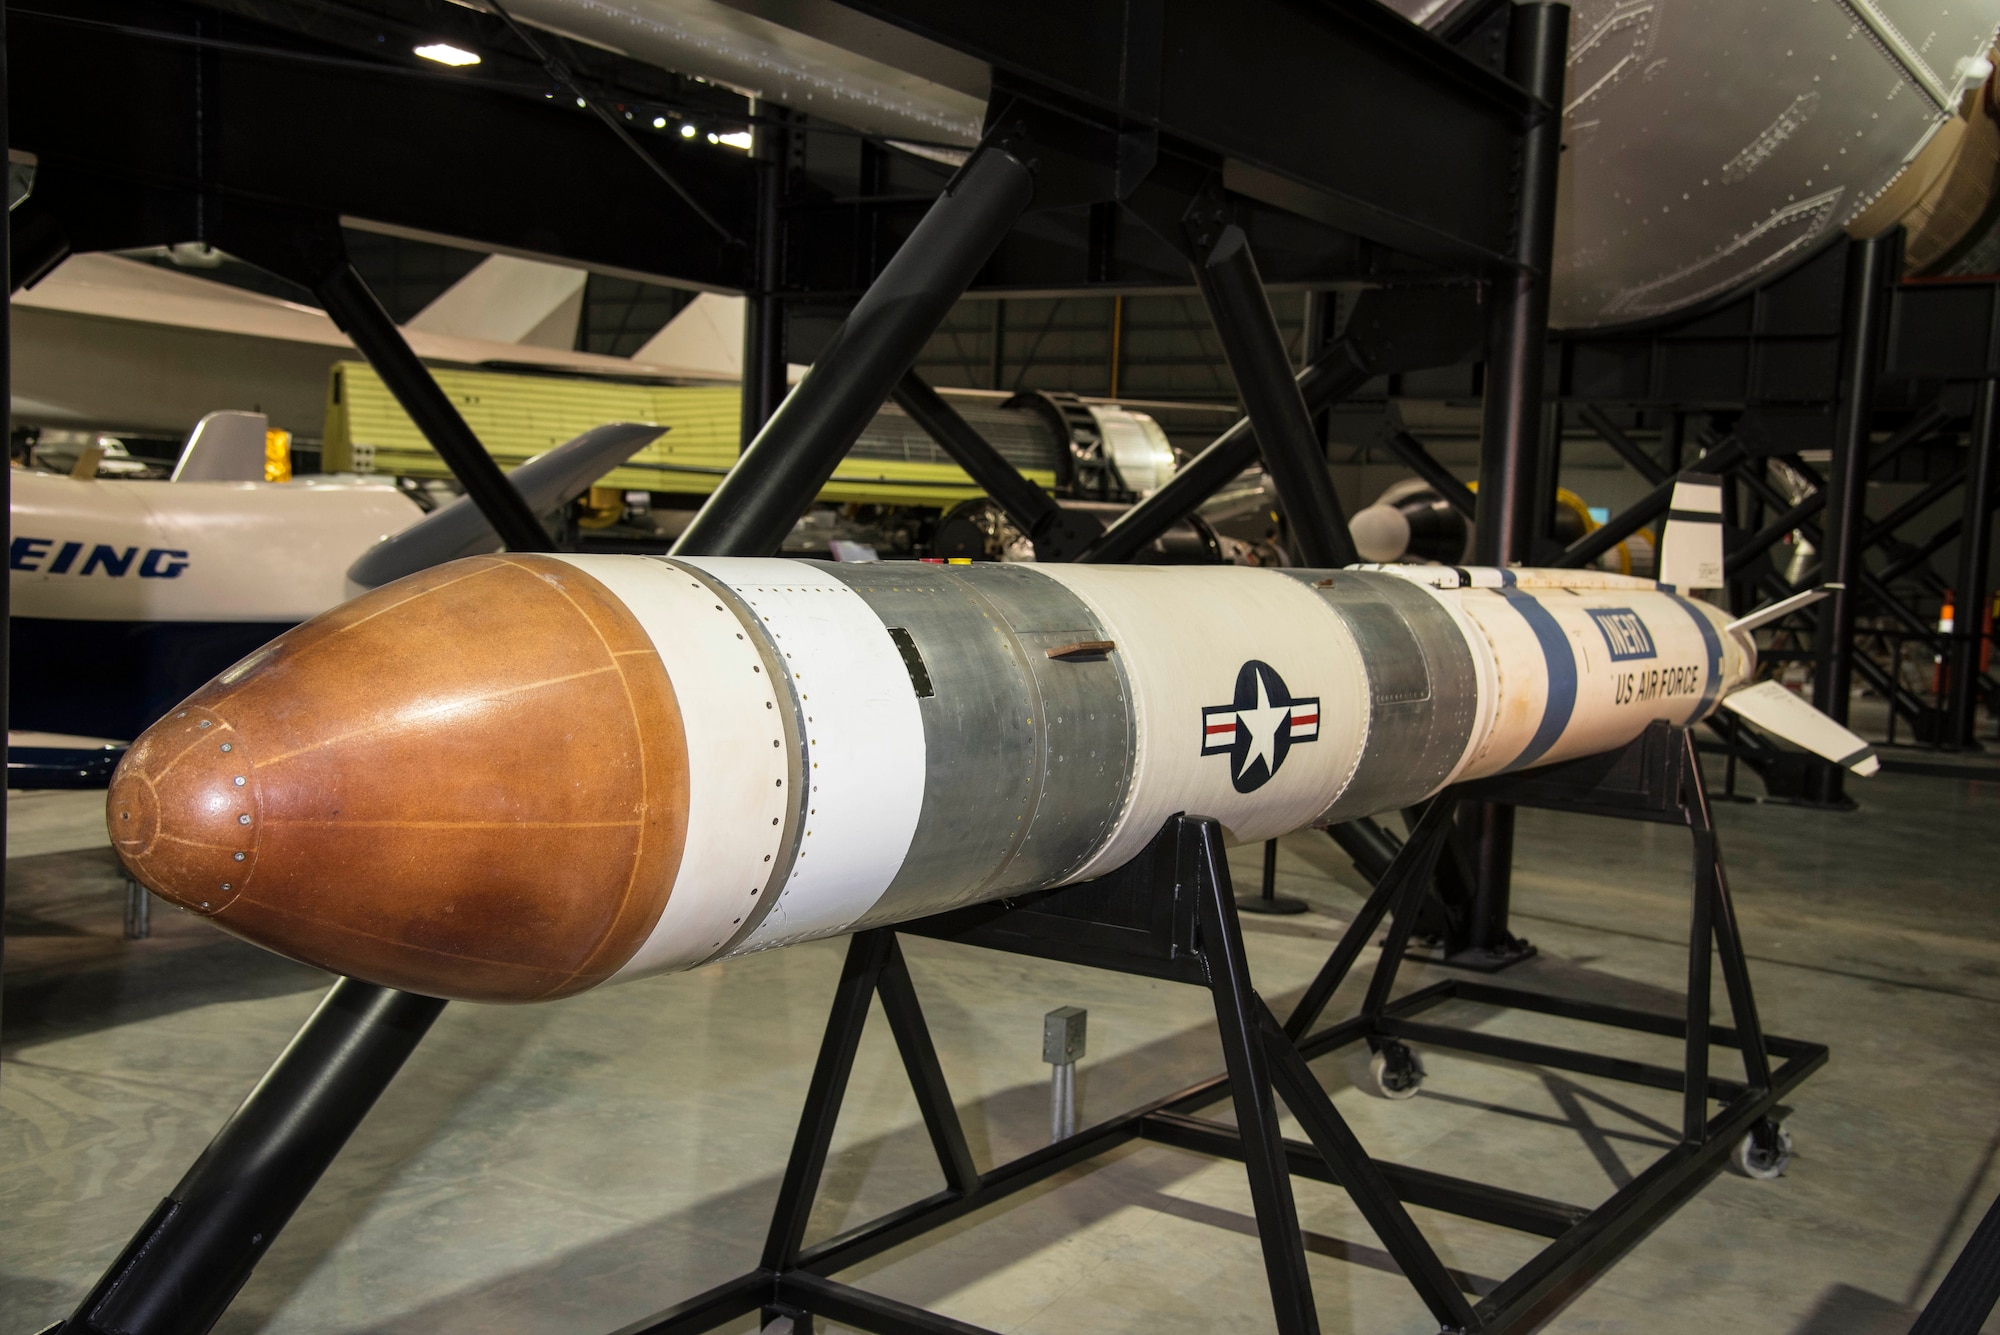 DAYTON, Ohio -- Air-launched anti-satellite missiles (ASAT) in the Space Gallery at the National Museum of the U.S. Air Force. (U.S. Air Force photo by Ken LaRock)
